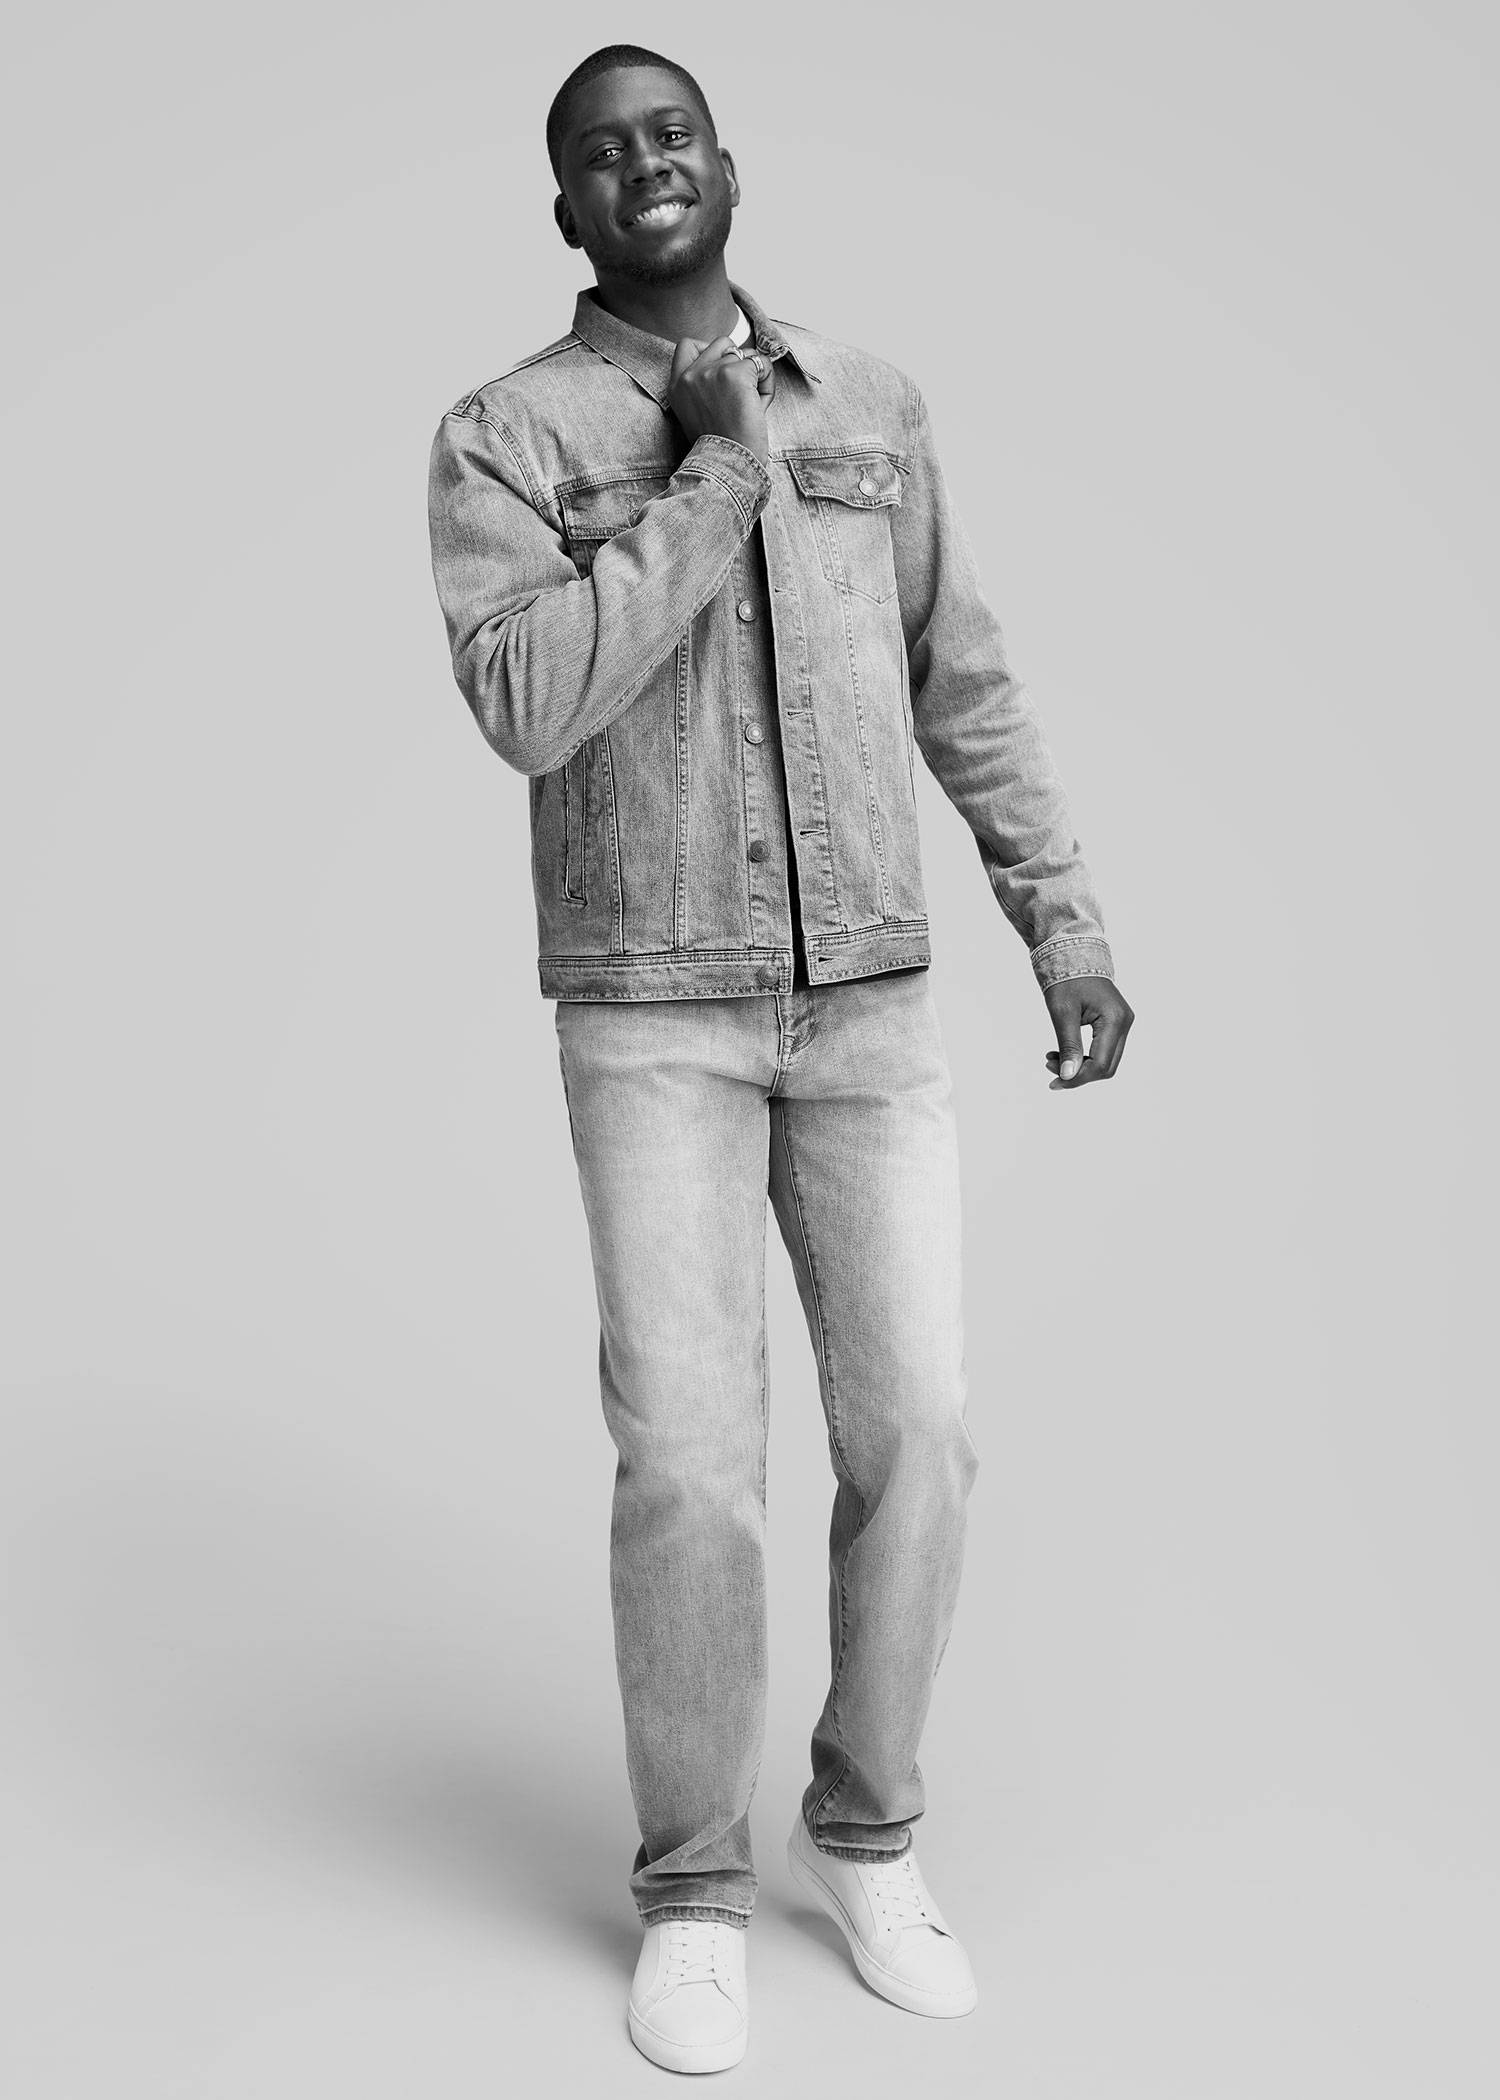 Tall man wearing a light denim jacket and jeans